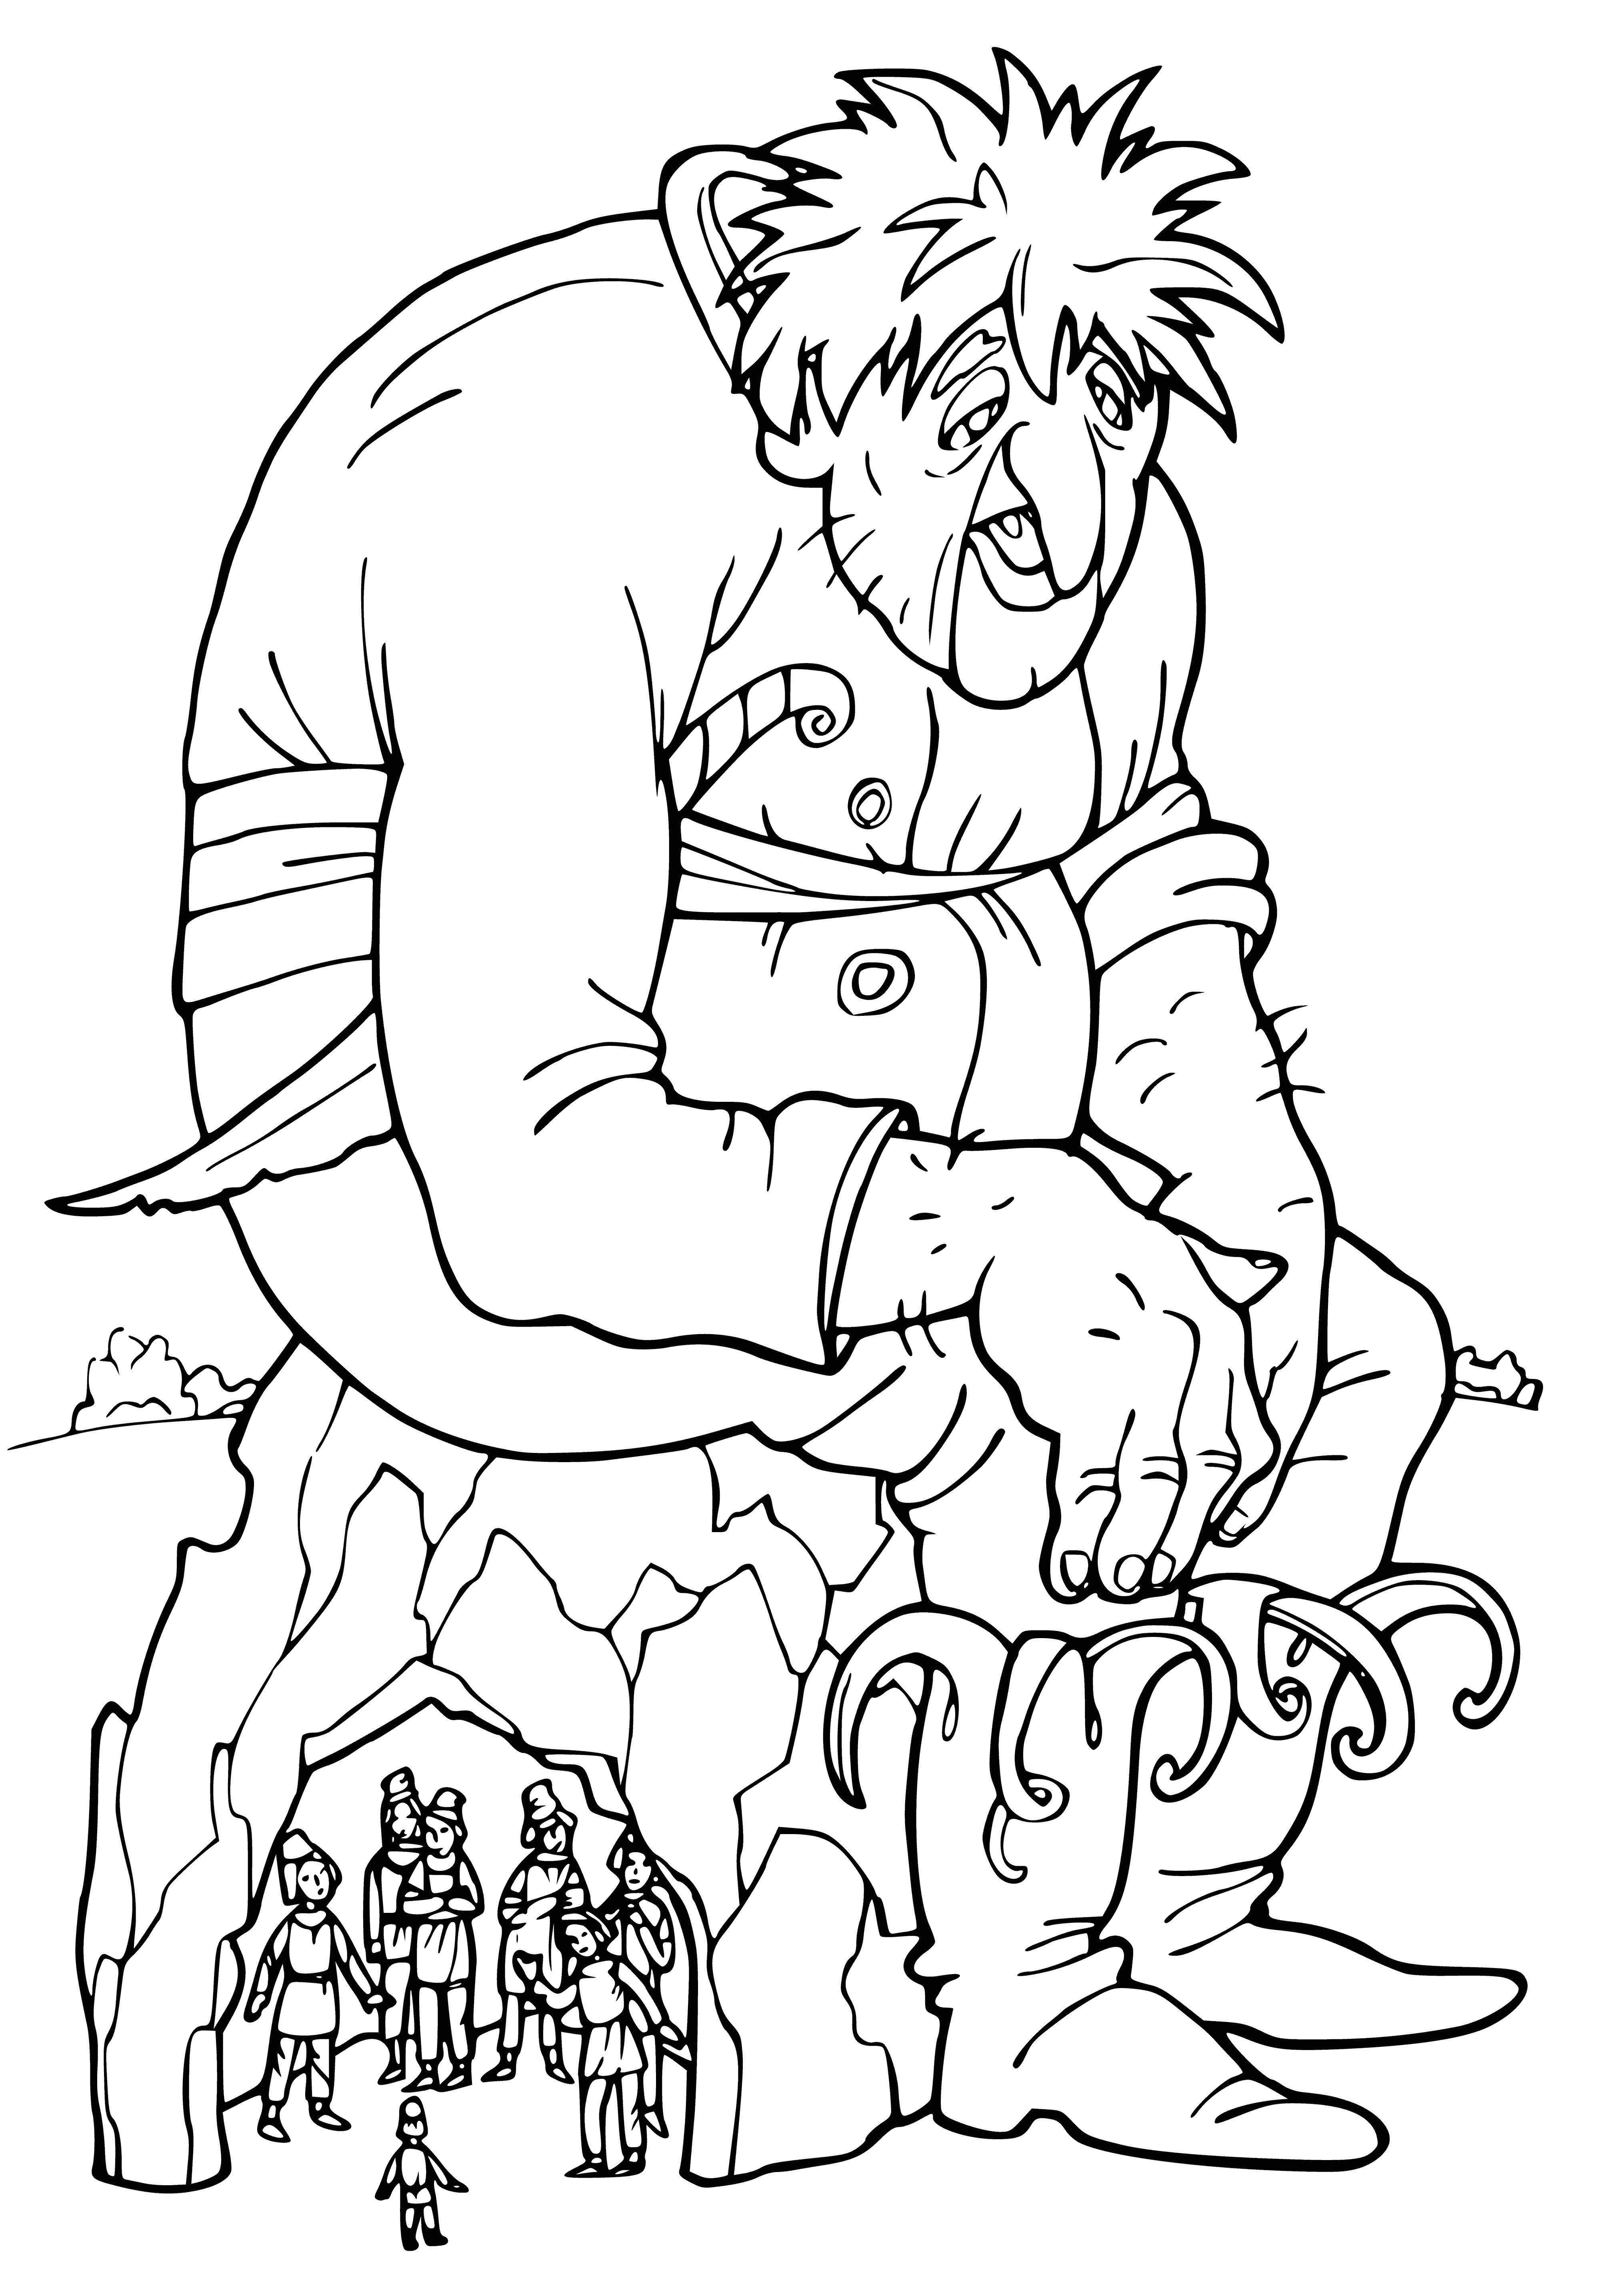 Tom Thumb coloring page